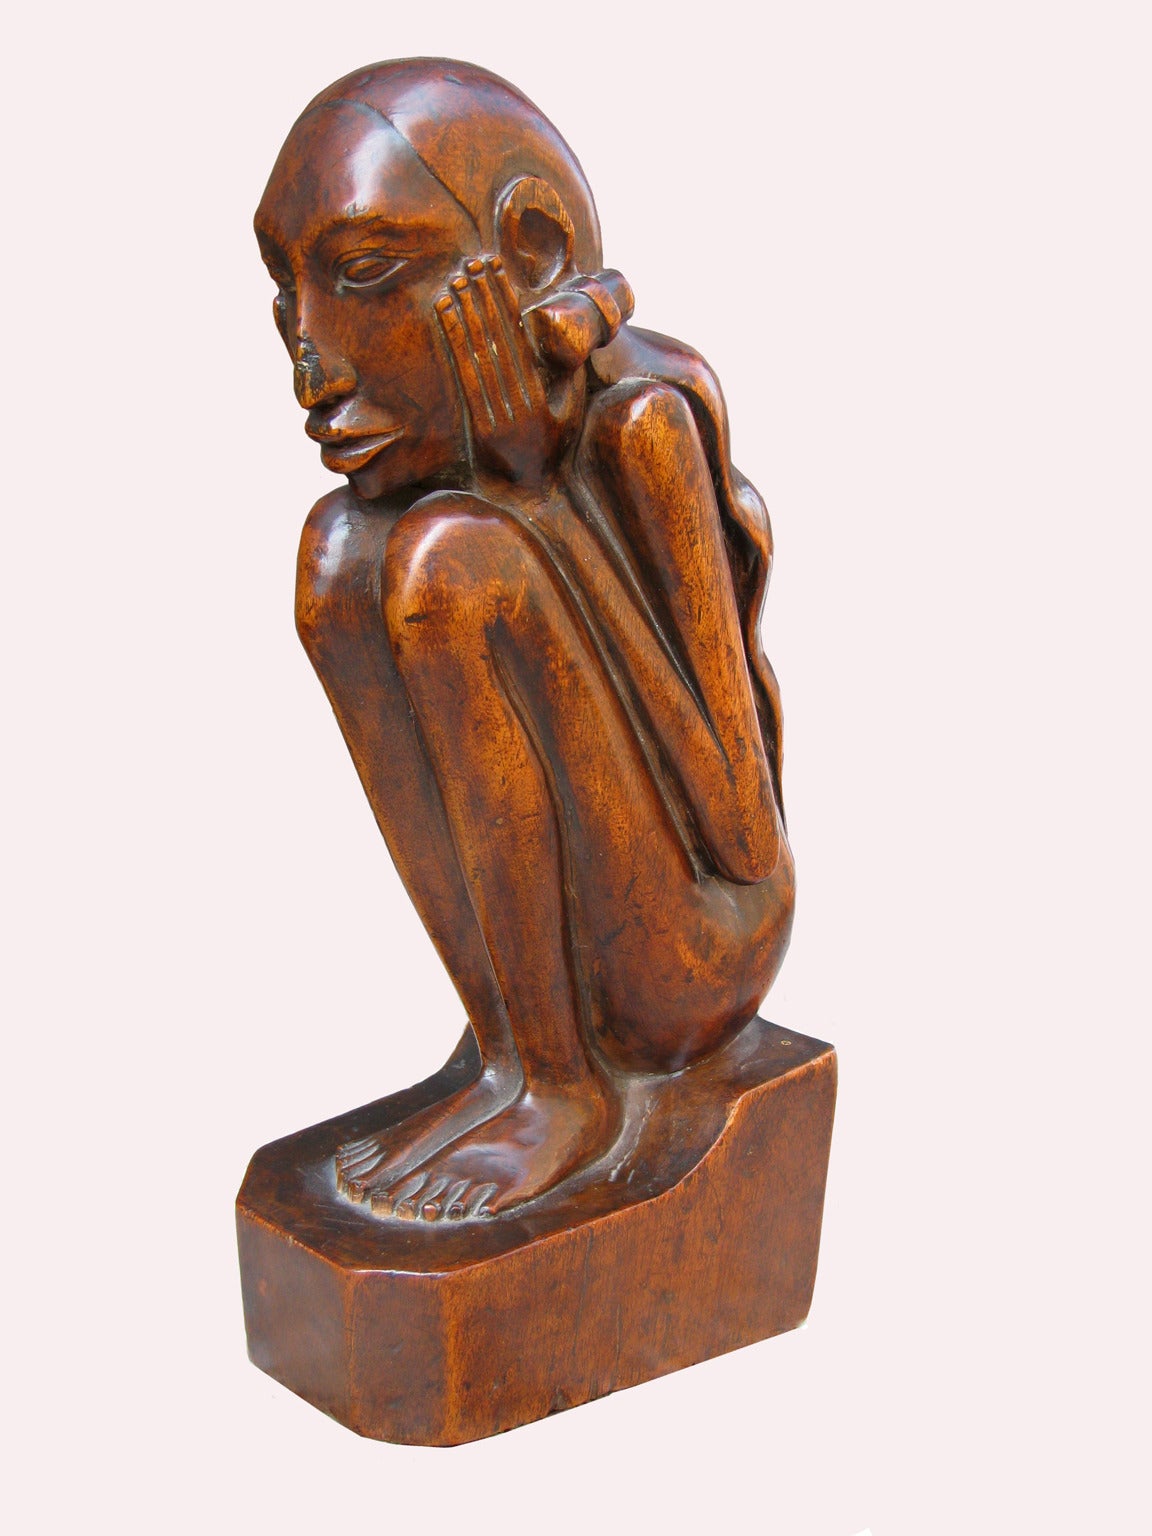 Balinese woodcutters are still phenomenal but the most beautiful examples of their sculptural works are the tropical hard-wooden sculptures from the Art Deco period like this gorgeous lady.